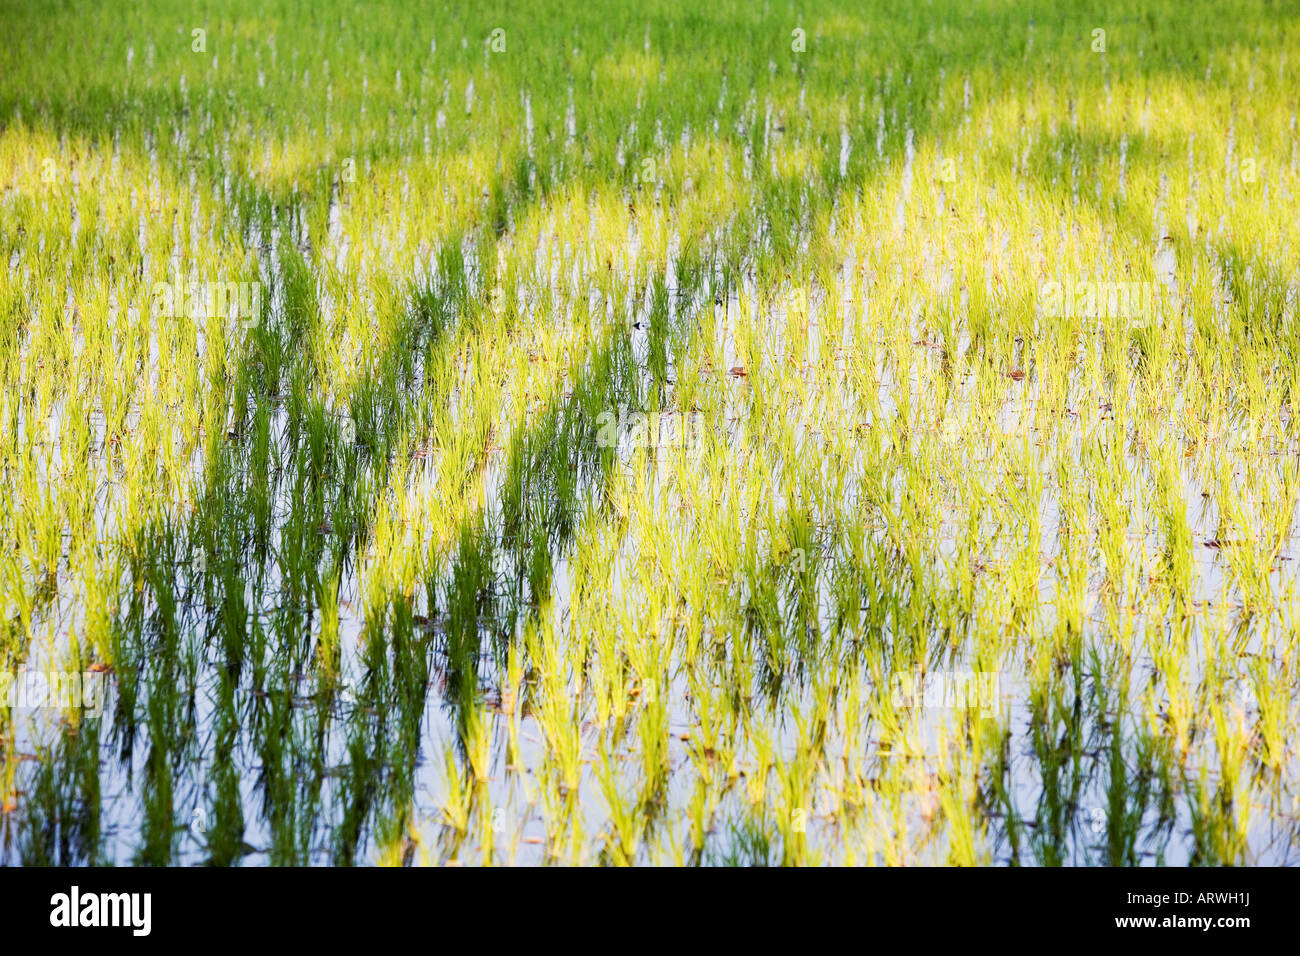 Oryza sativa. Tree shadow on a freshly planted rice paddy in India Stock Photo